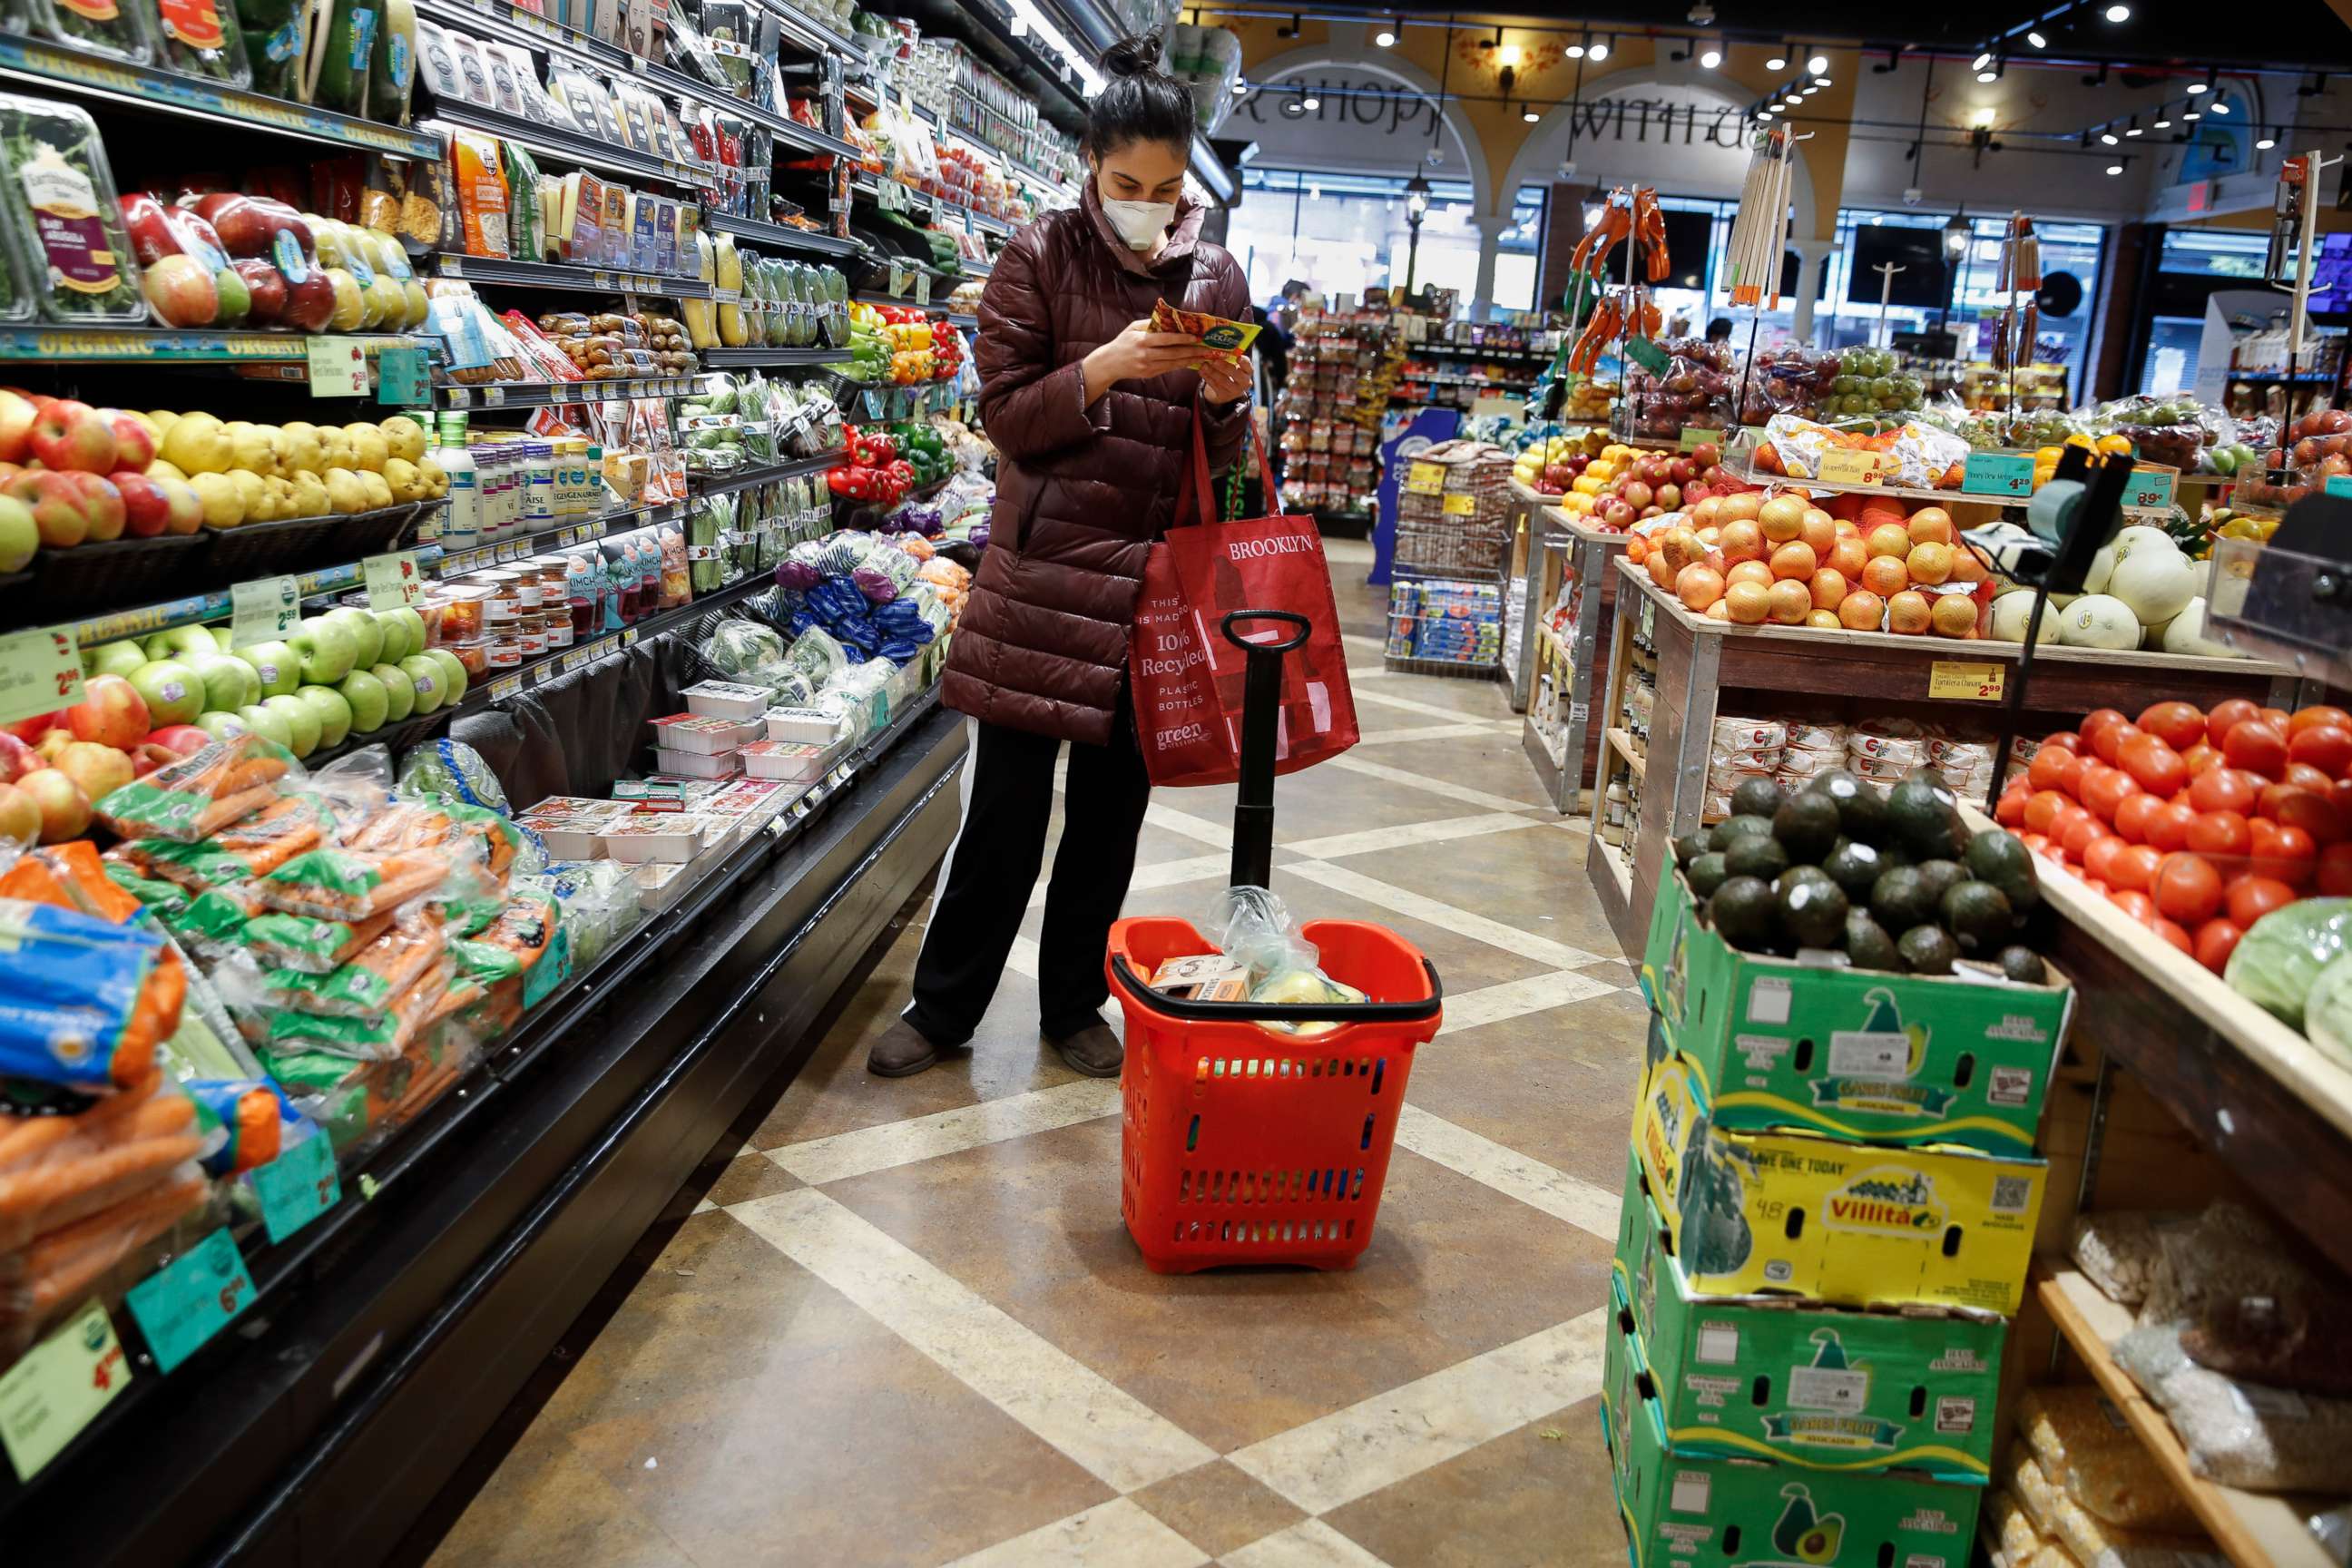 PHOTO: A shopper wears a face mask in the produce section of a grocery store, April 18, 2020, in the Harlem neighborhood of the Manhattan borough of New York, during the coronavirus outbreak.